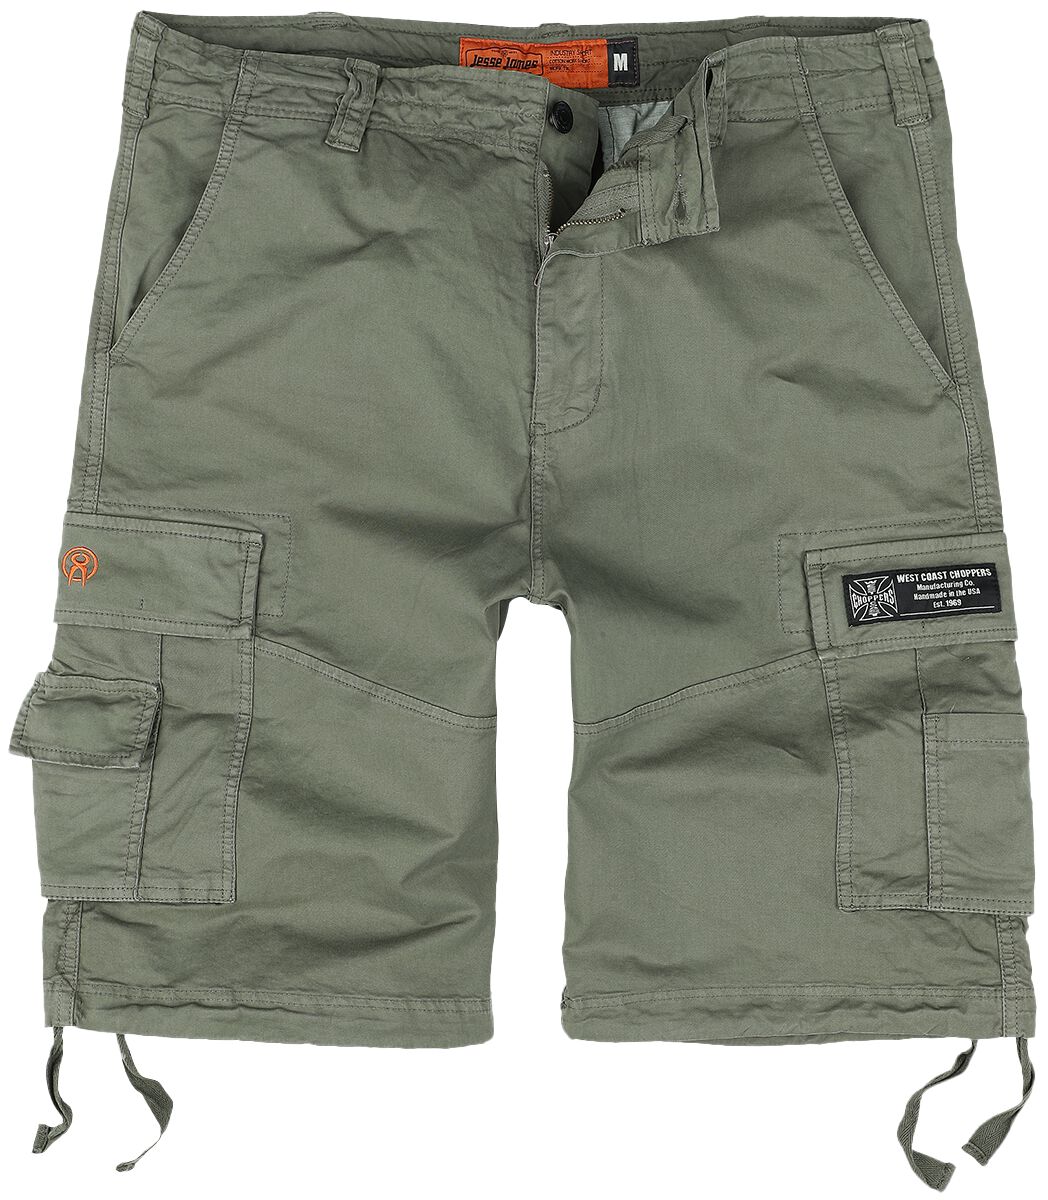 West Coast Choppers Cargo Shorts Short oliv in S